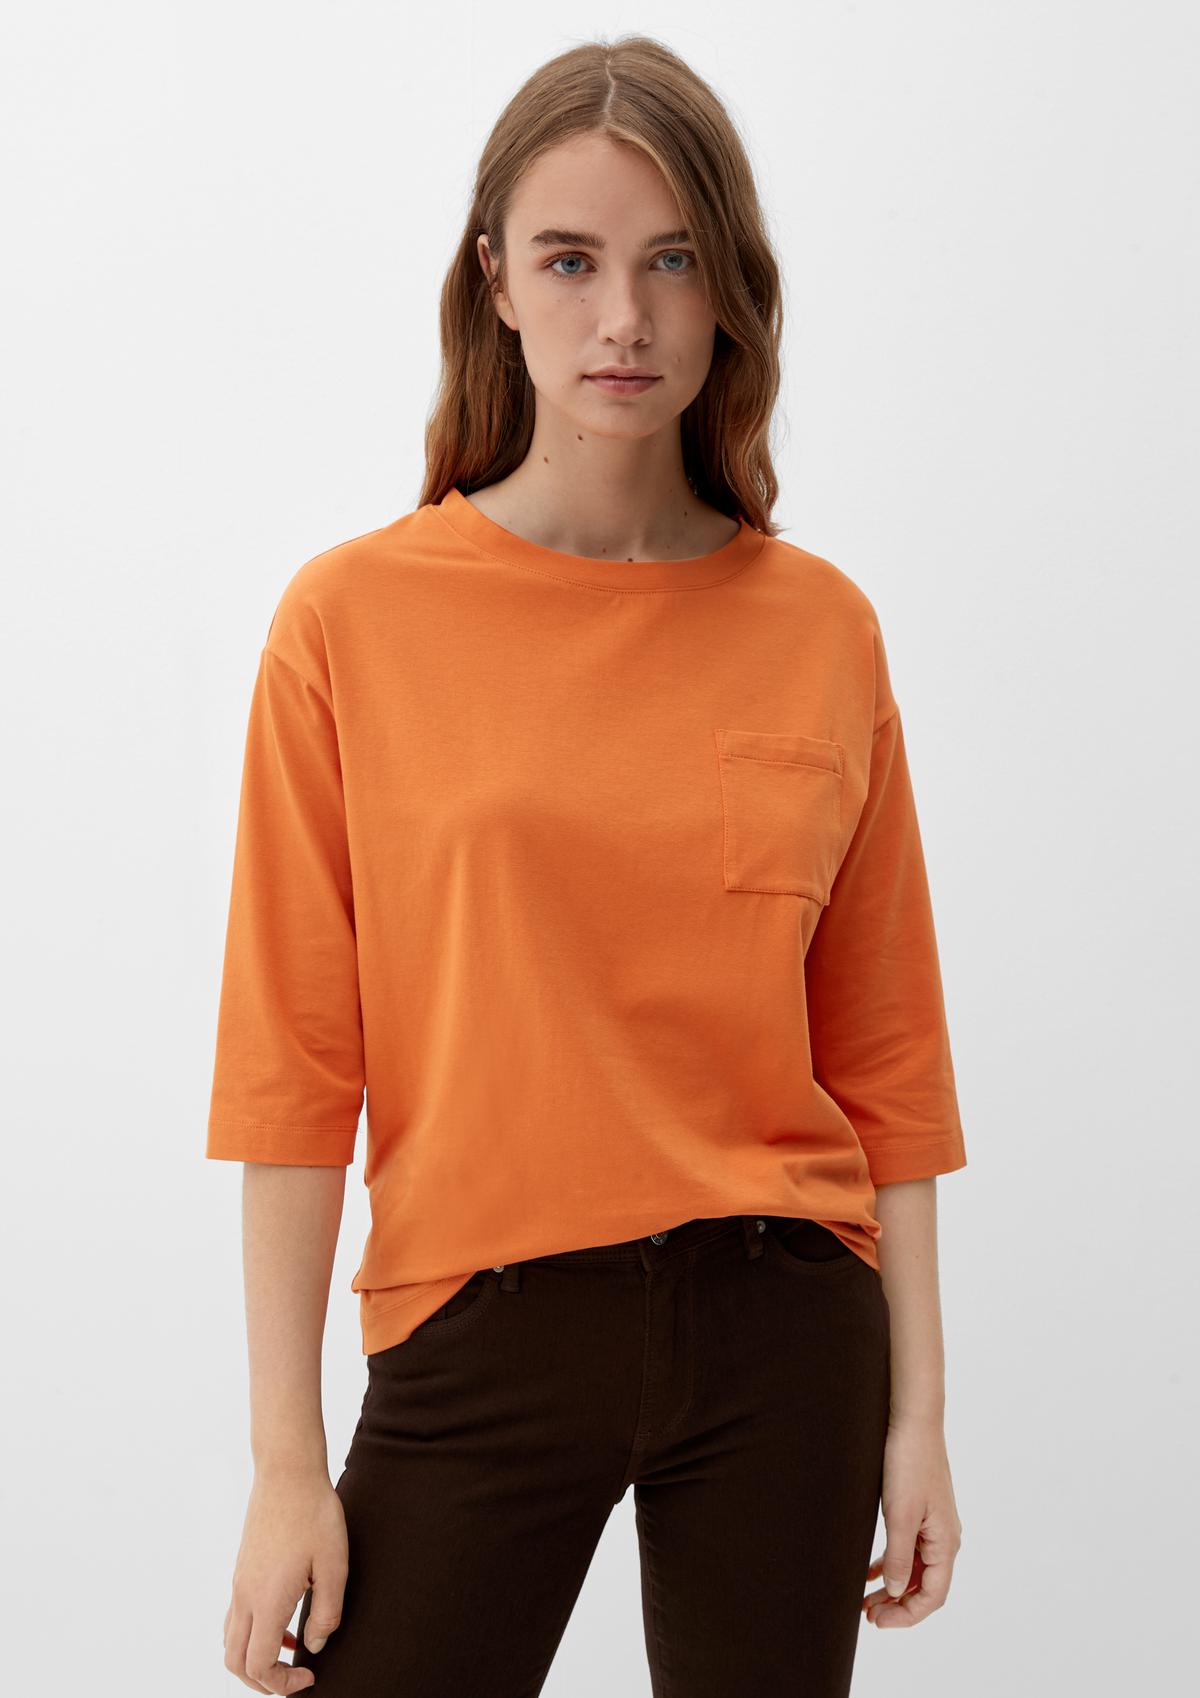 T-shirt with a breast pocket - orange